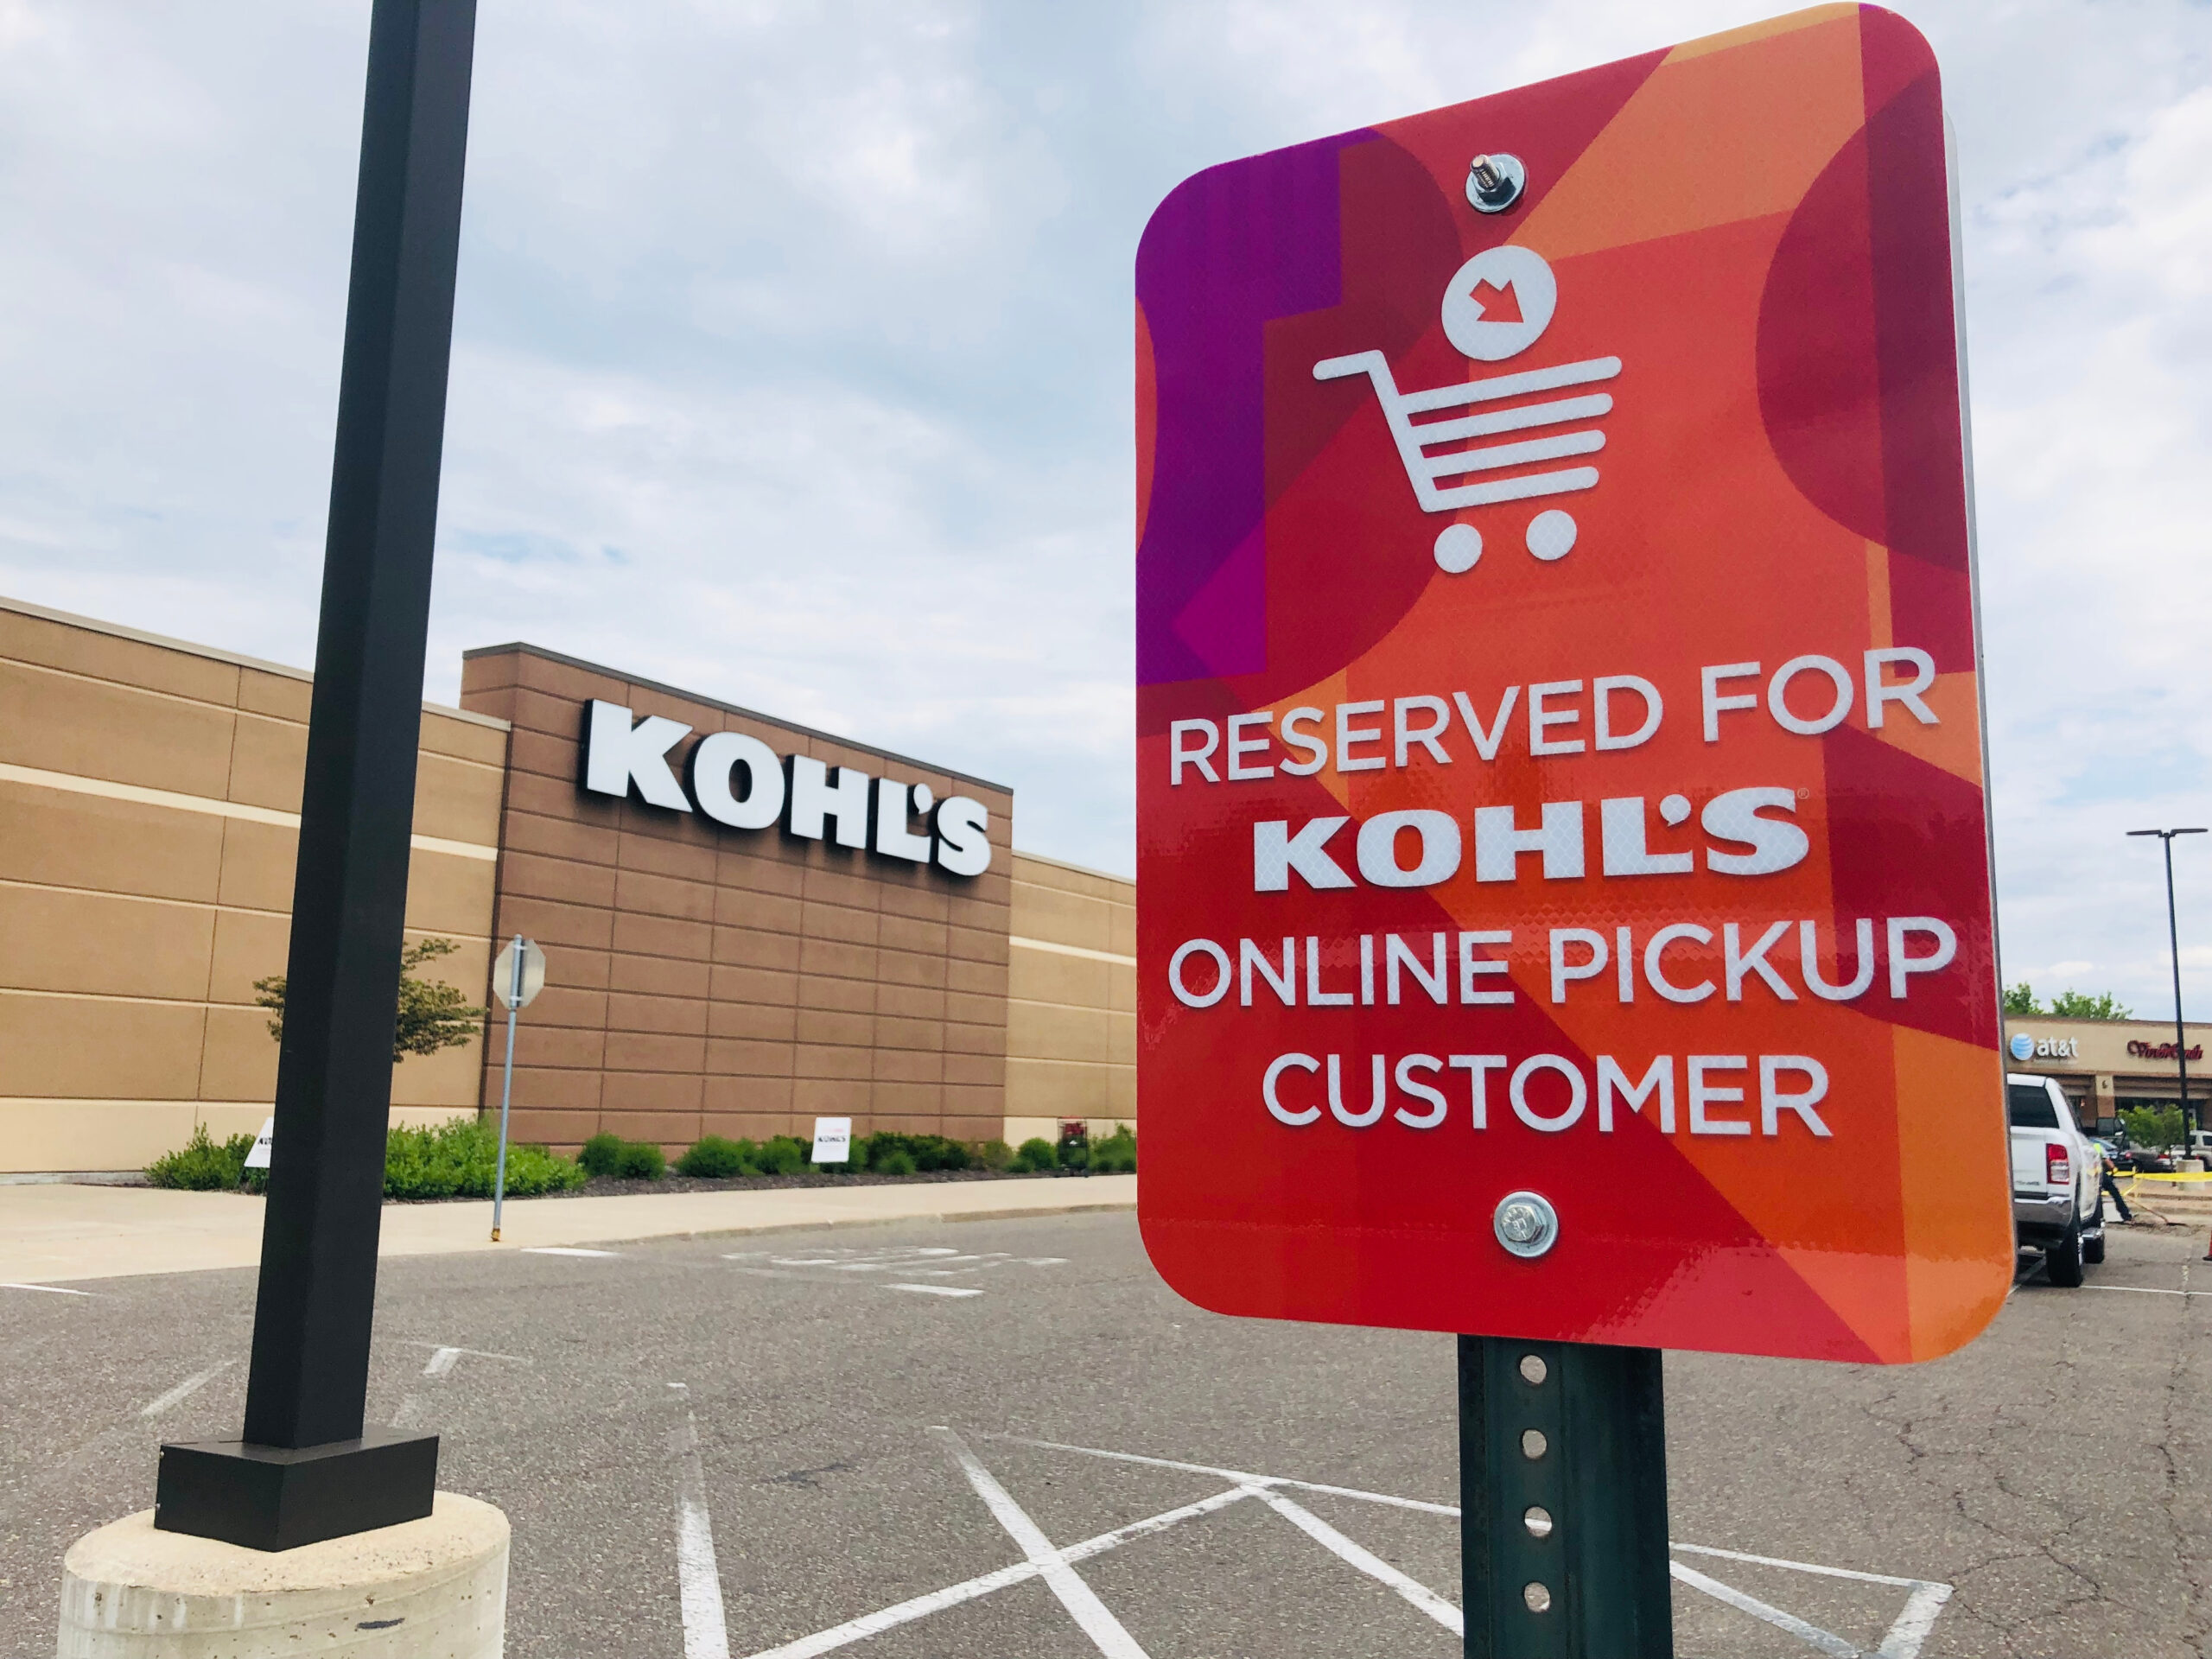 🏃 Kohl's: Up to 85% Off Clearance! Deal ends September 14th! 👆 Find the  direct link in my bio OR Go to: 👉🏻TinaLikes.com/kohl